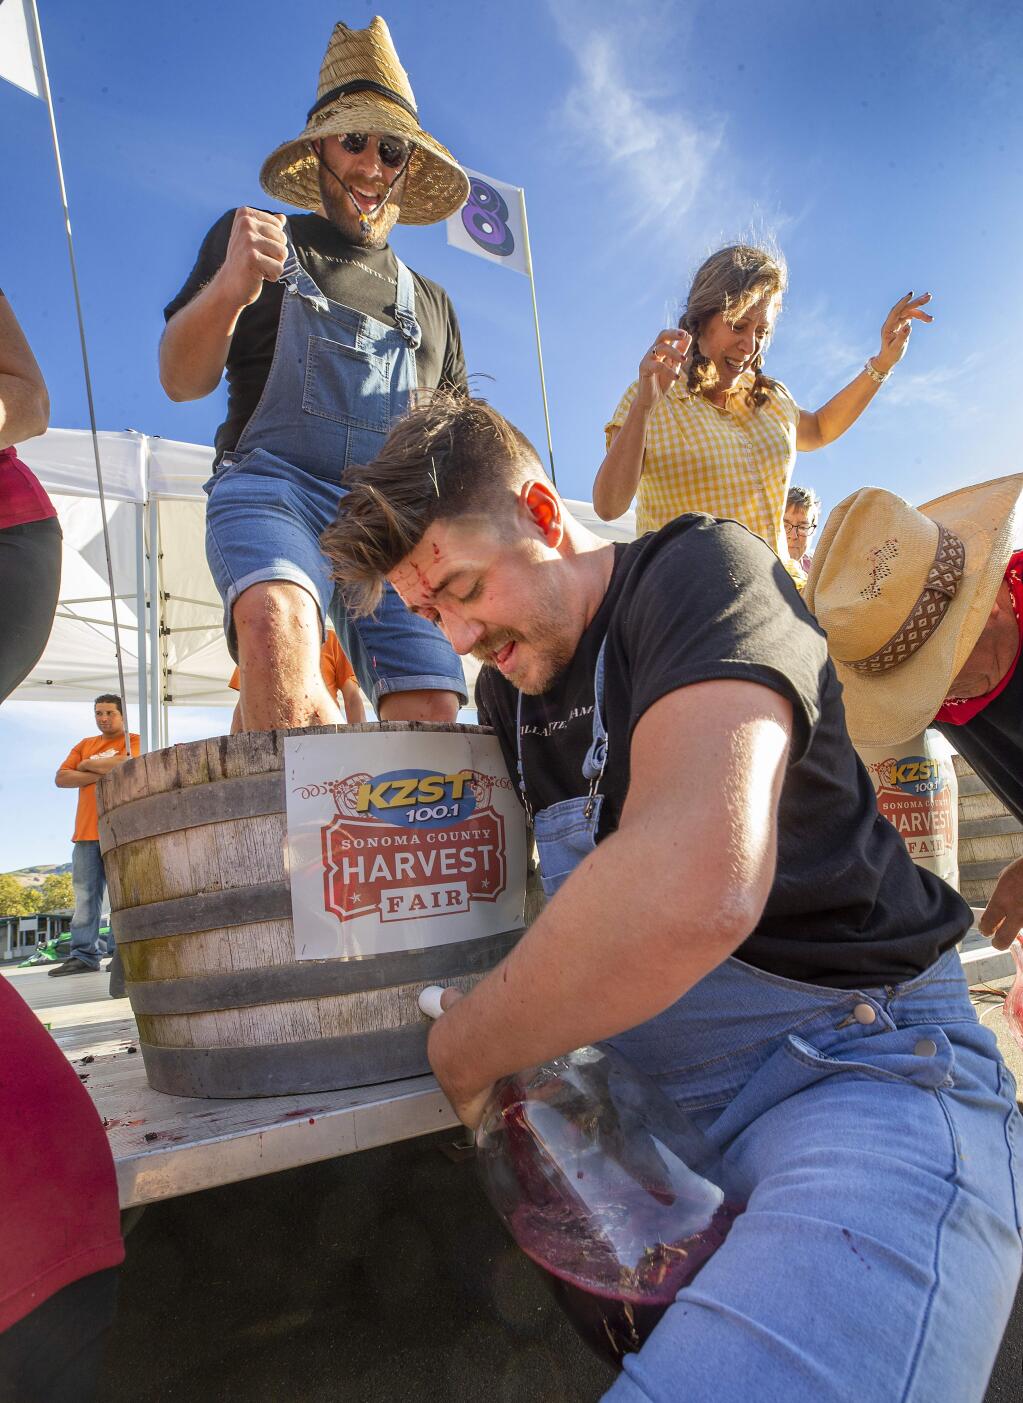 Dan Dykeman keeps his feet churning while Evan Strandberg uses an arm to push juice into a jug at the 45th annual Sonoma County Harvest Fair on Friday. The pair won a competition in Oregon and won the opportunity to compete in the World Championship Grape Stomp. (photo by John Burgess/The Press Democrat)